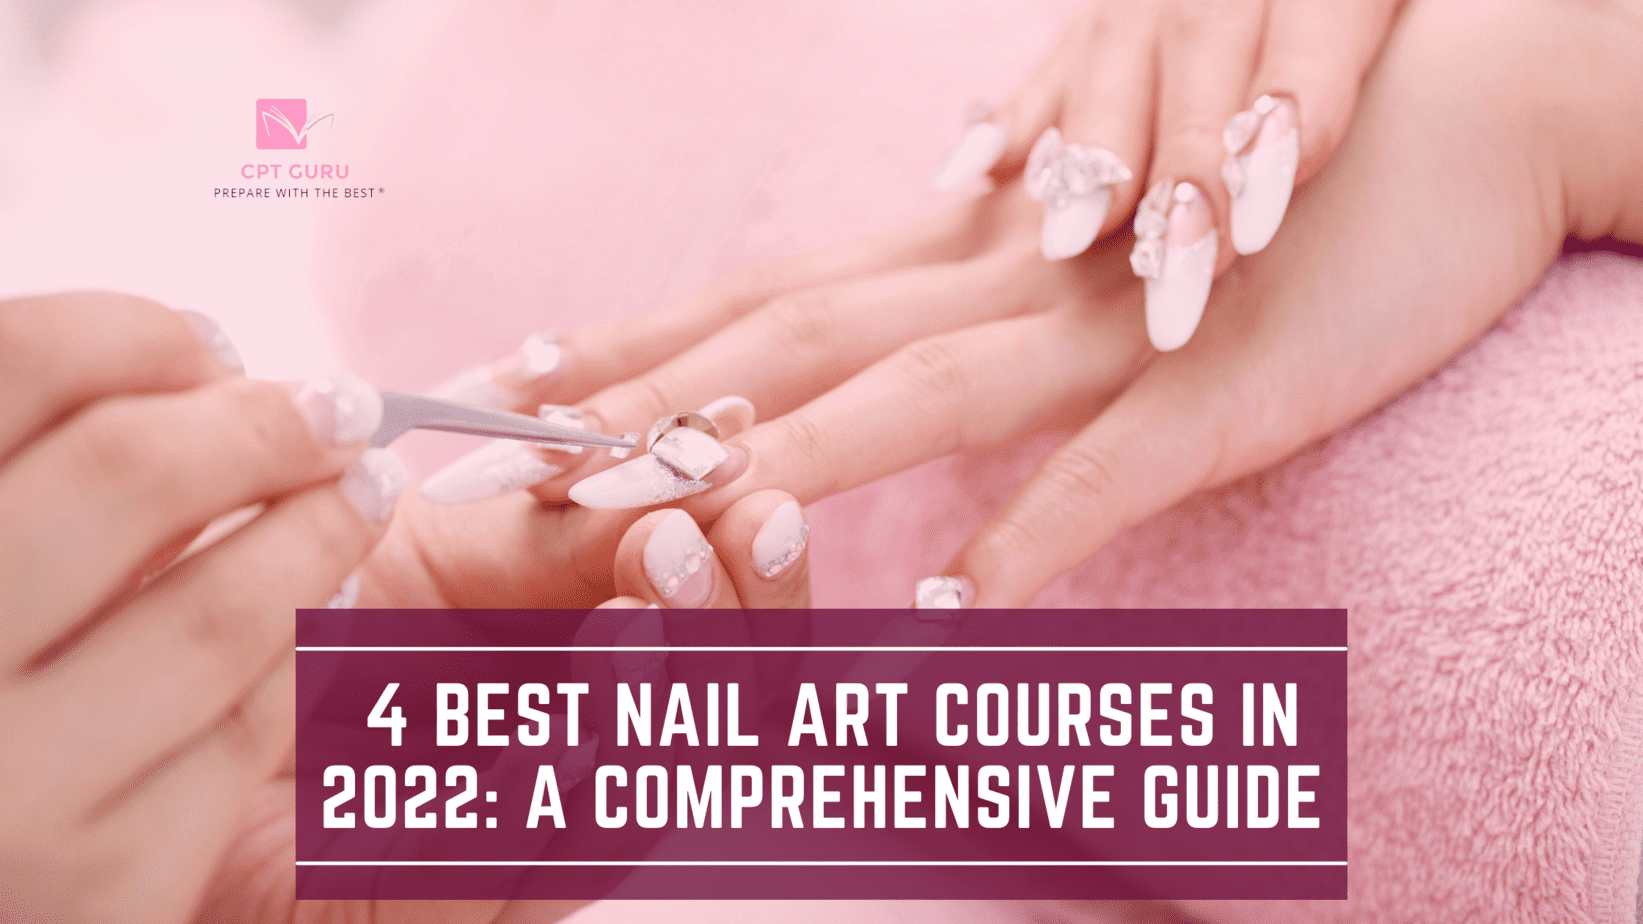 4 Best Nail Art Courses in 2022: A Comprehensive Guide